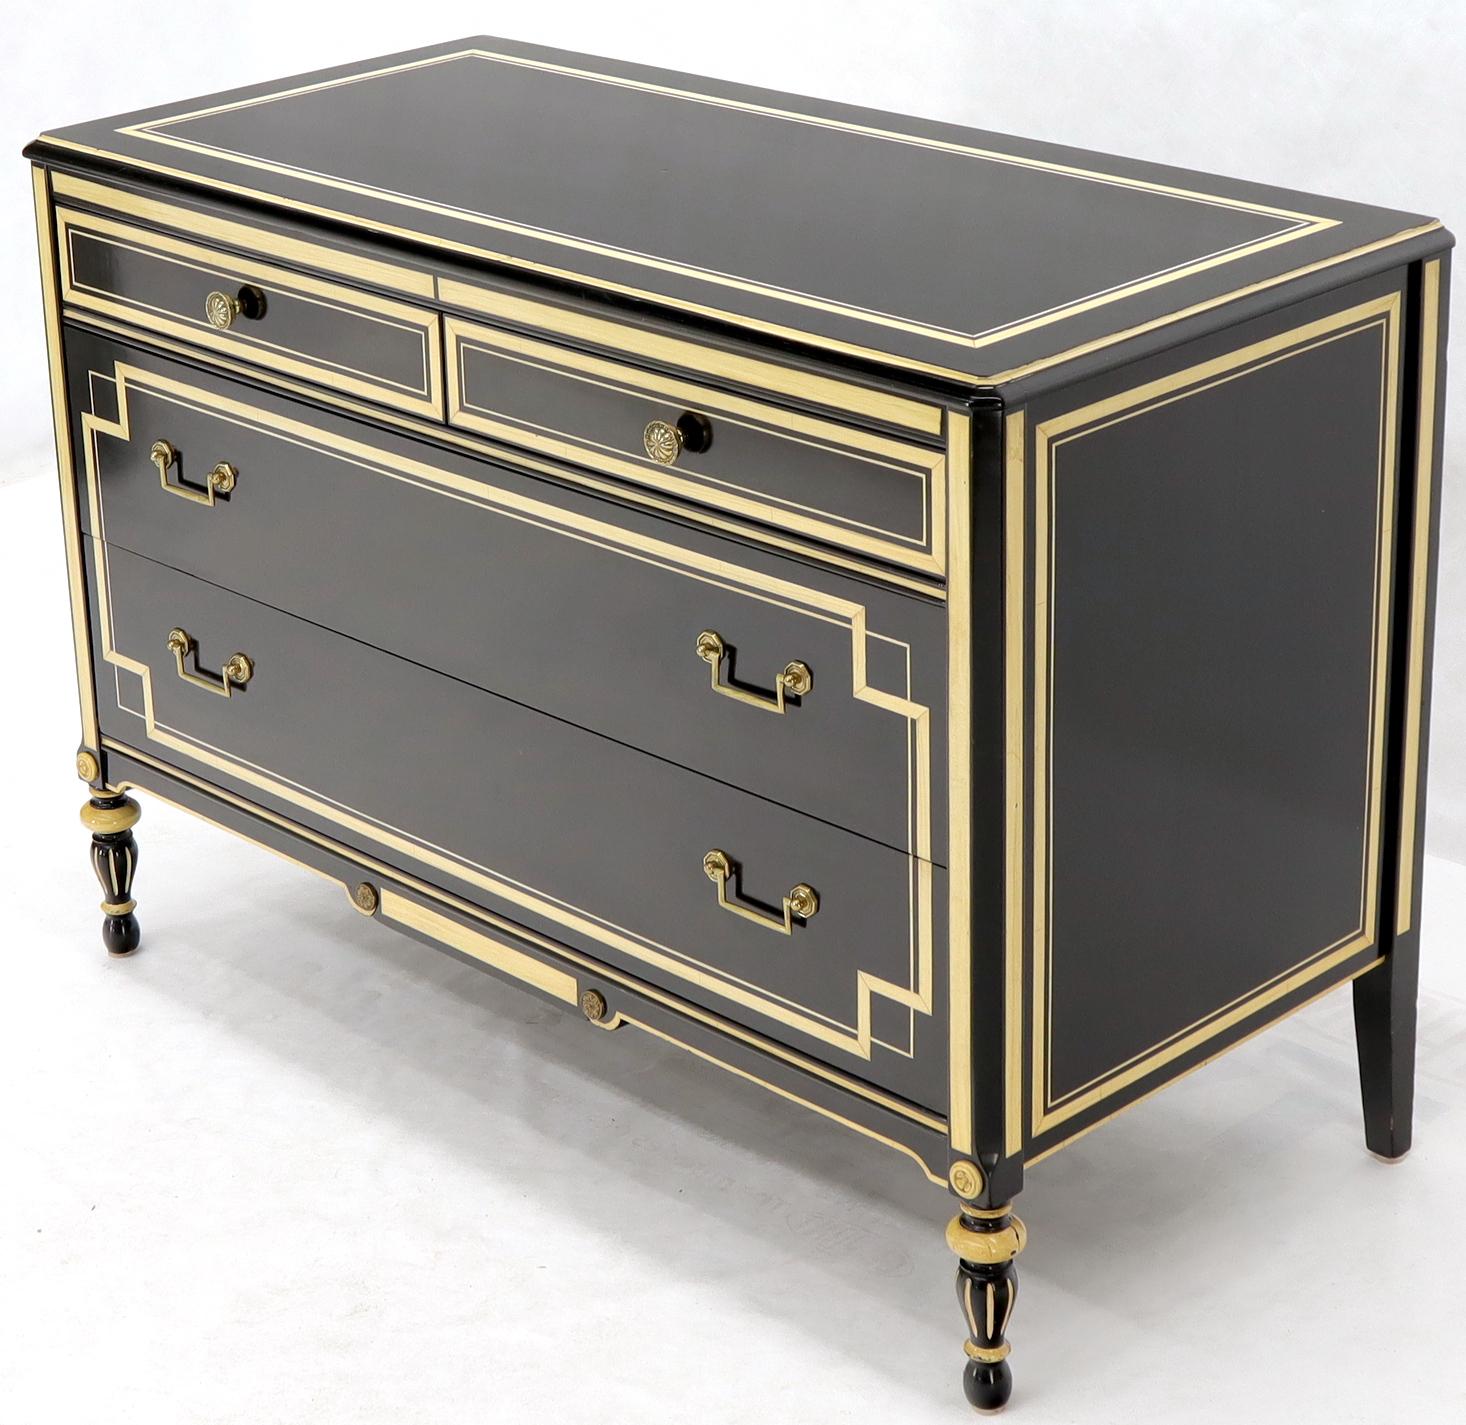 Stunning director black lacquer and ivory beige dresser. In style of Maison Jensen. NYC are delivery starts from $175.